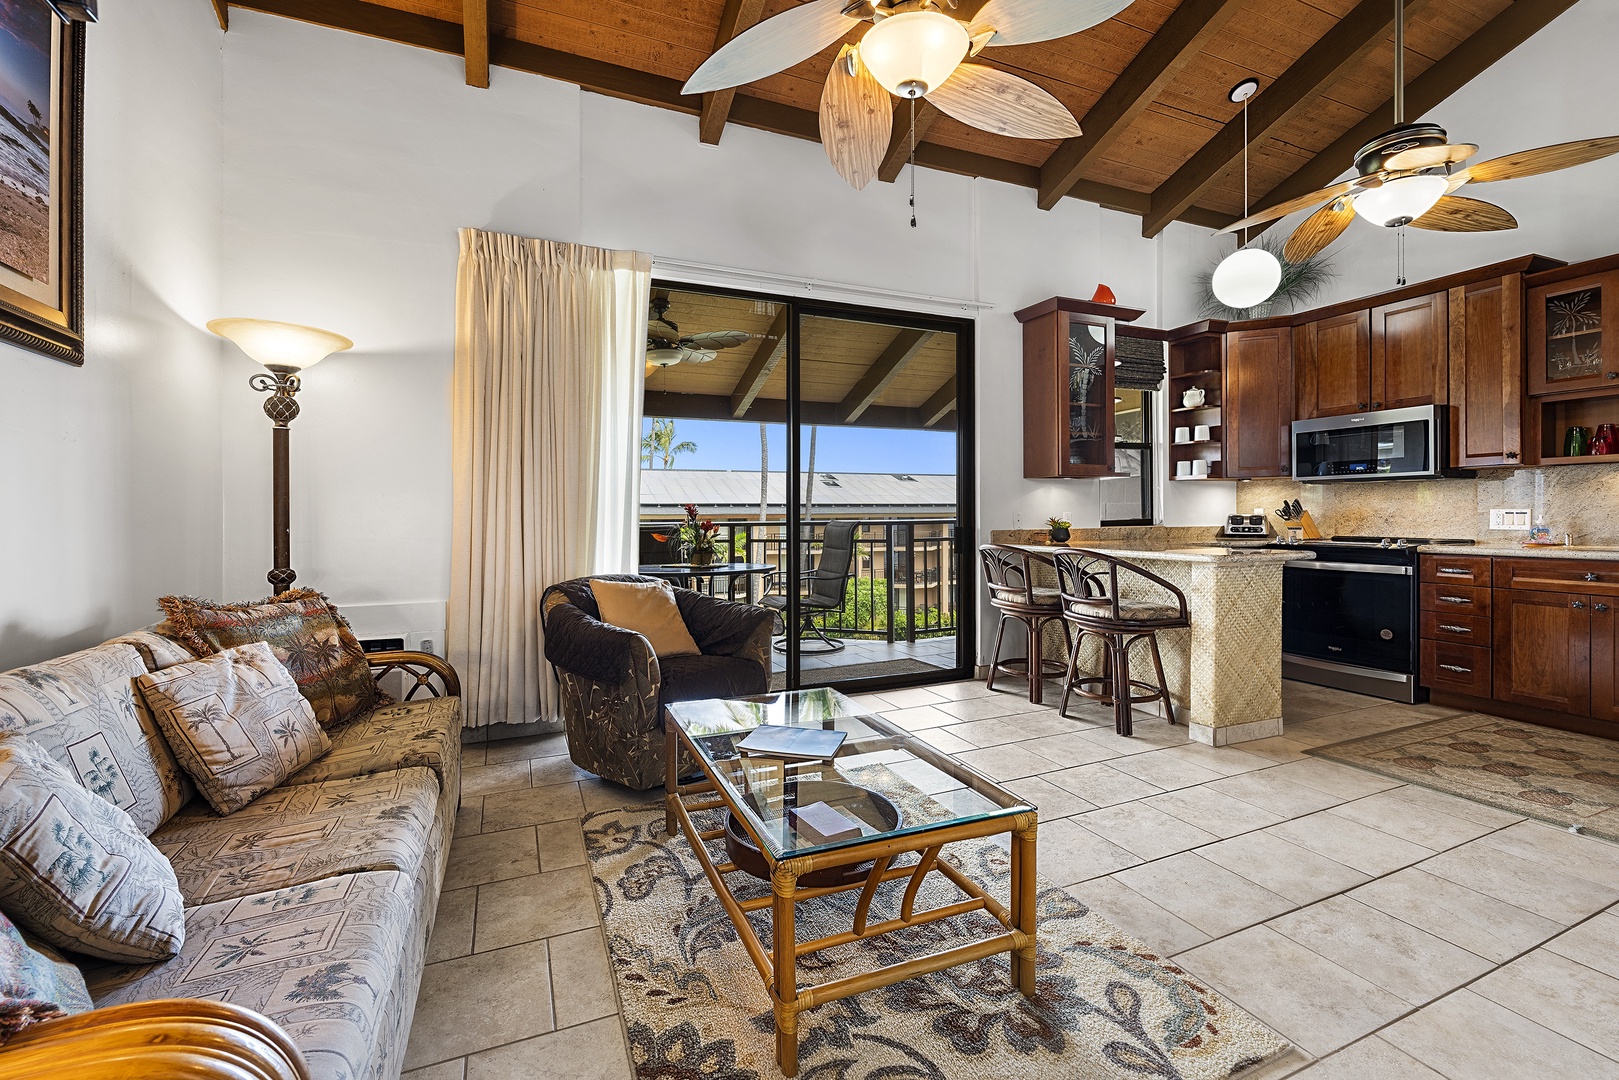 Kailua Kona Vacation Rentals, Kona Makai 6305 - There's plenty of natural light in the common spaces and sliding doors lead to your lanai